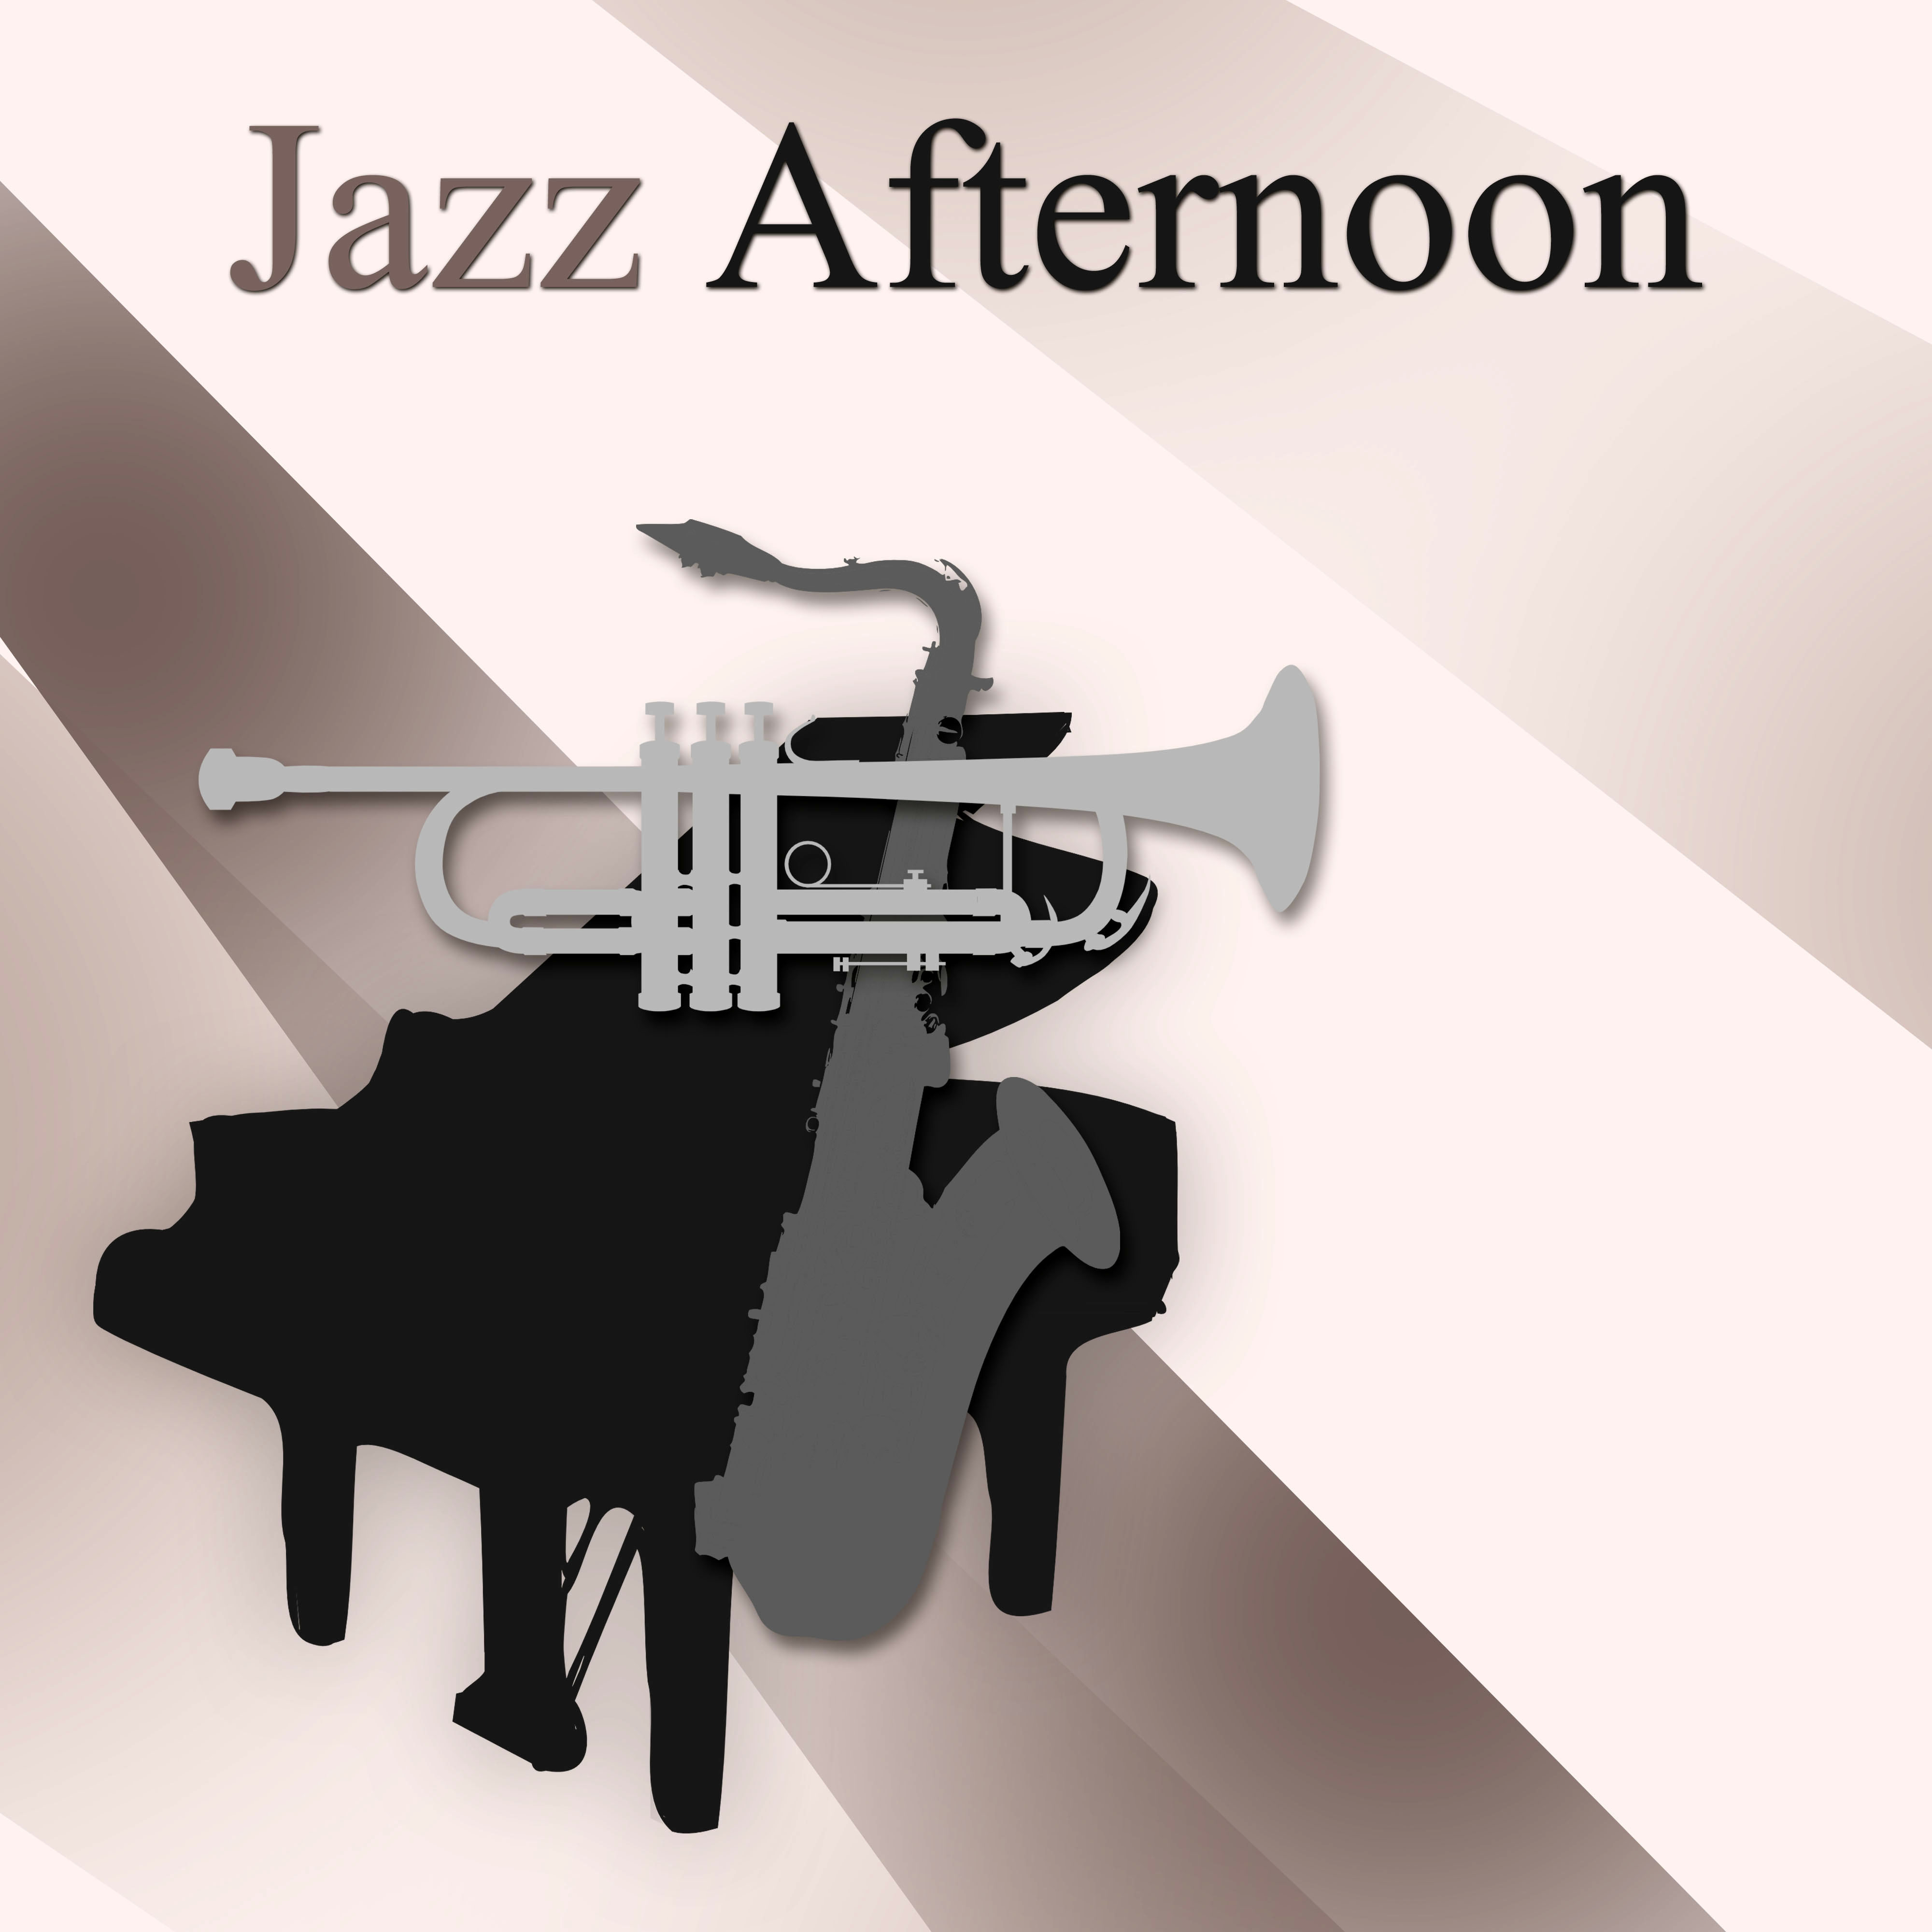 Jazz Afternoon  Energy Jazz Music, Add Positive Energy for All Day, Beautiful Piano Bar, Cocktail Party